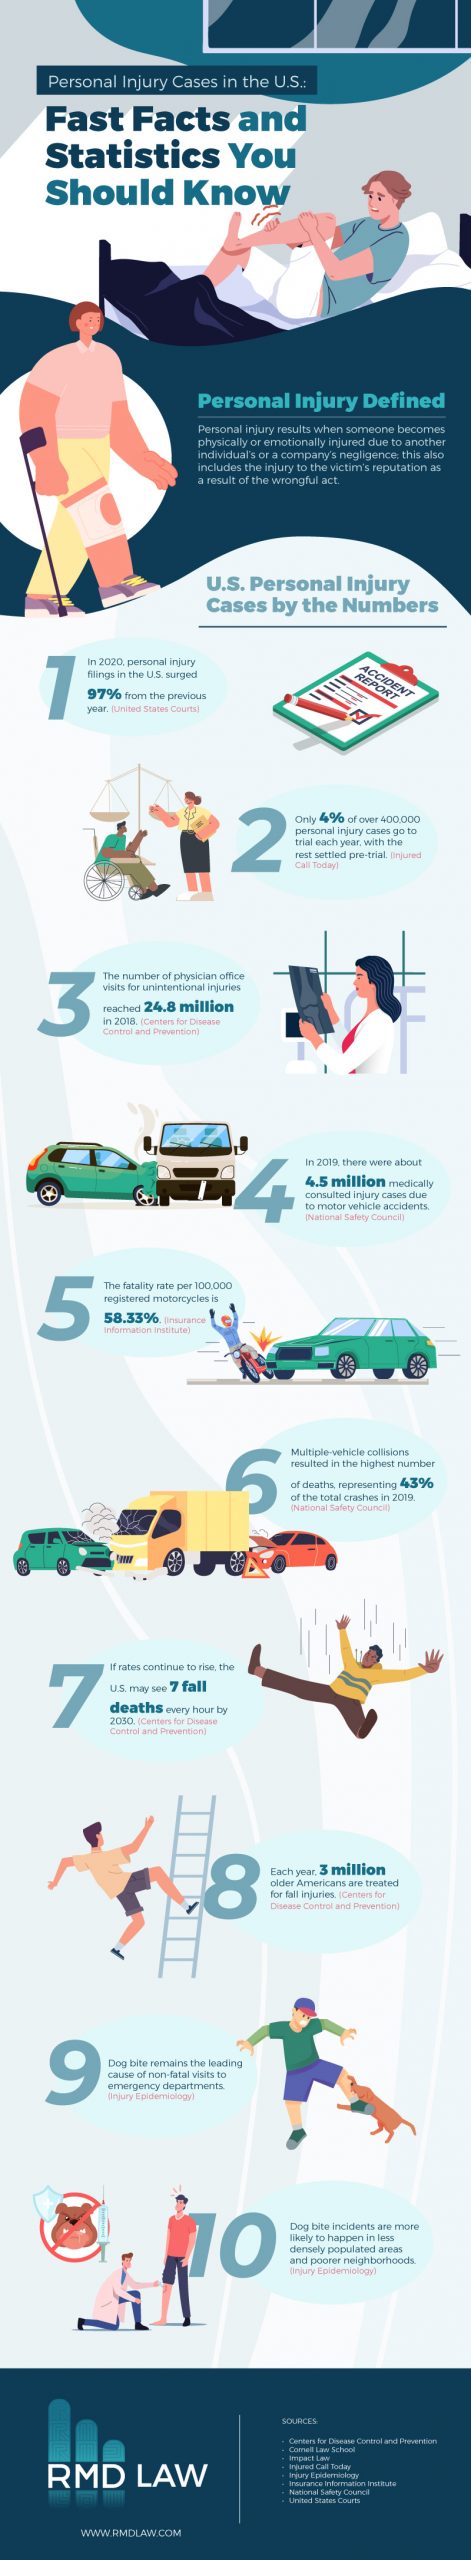 rmd law personal injury infographic